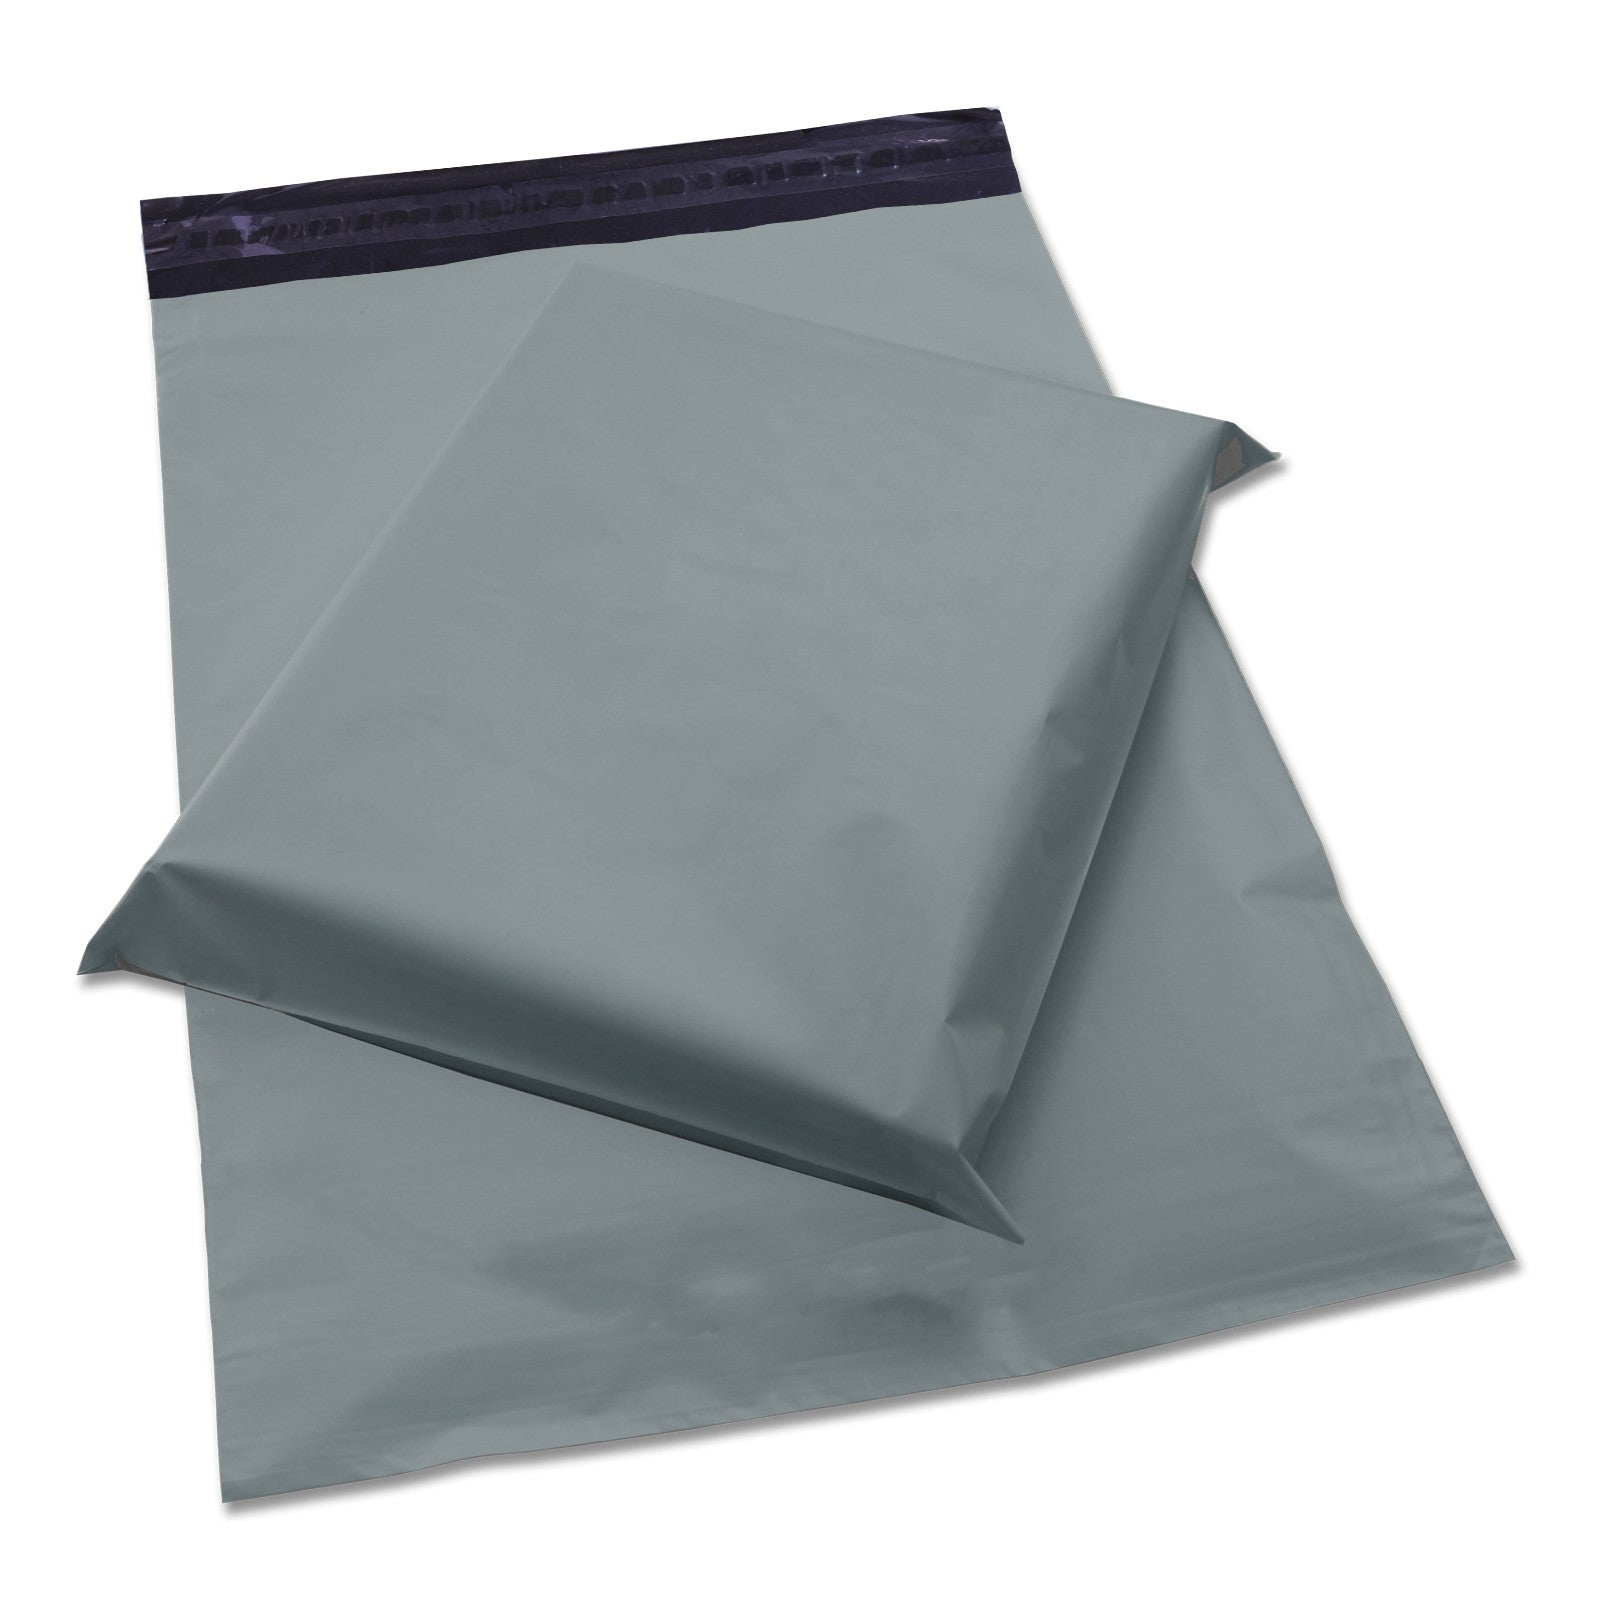 Multipurpose Poly Mailers; What to Pack or What to Not